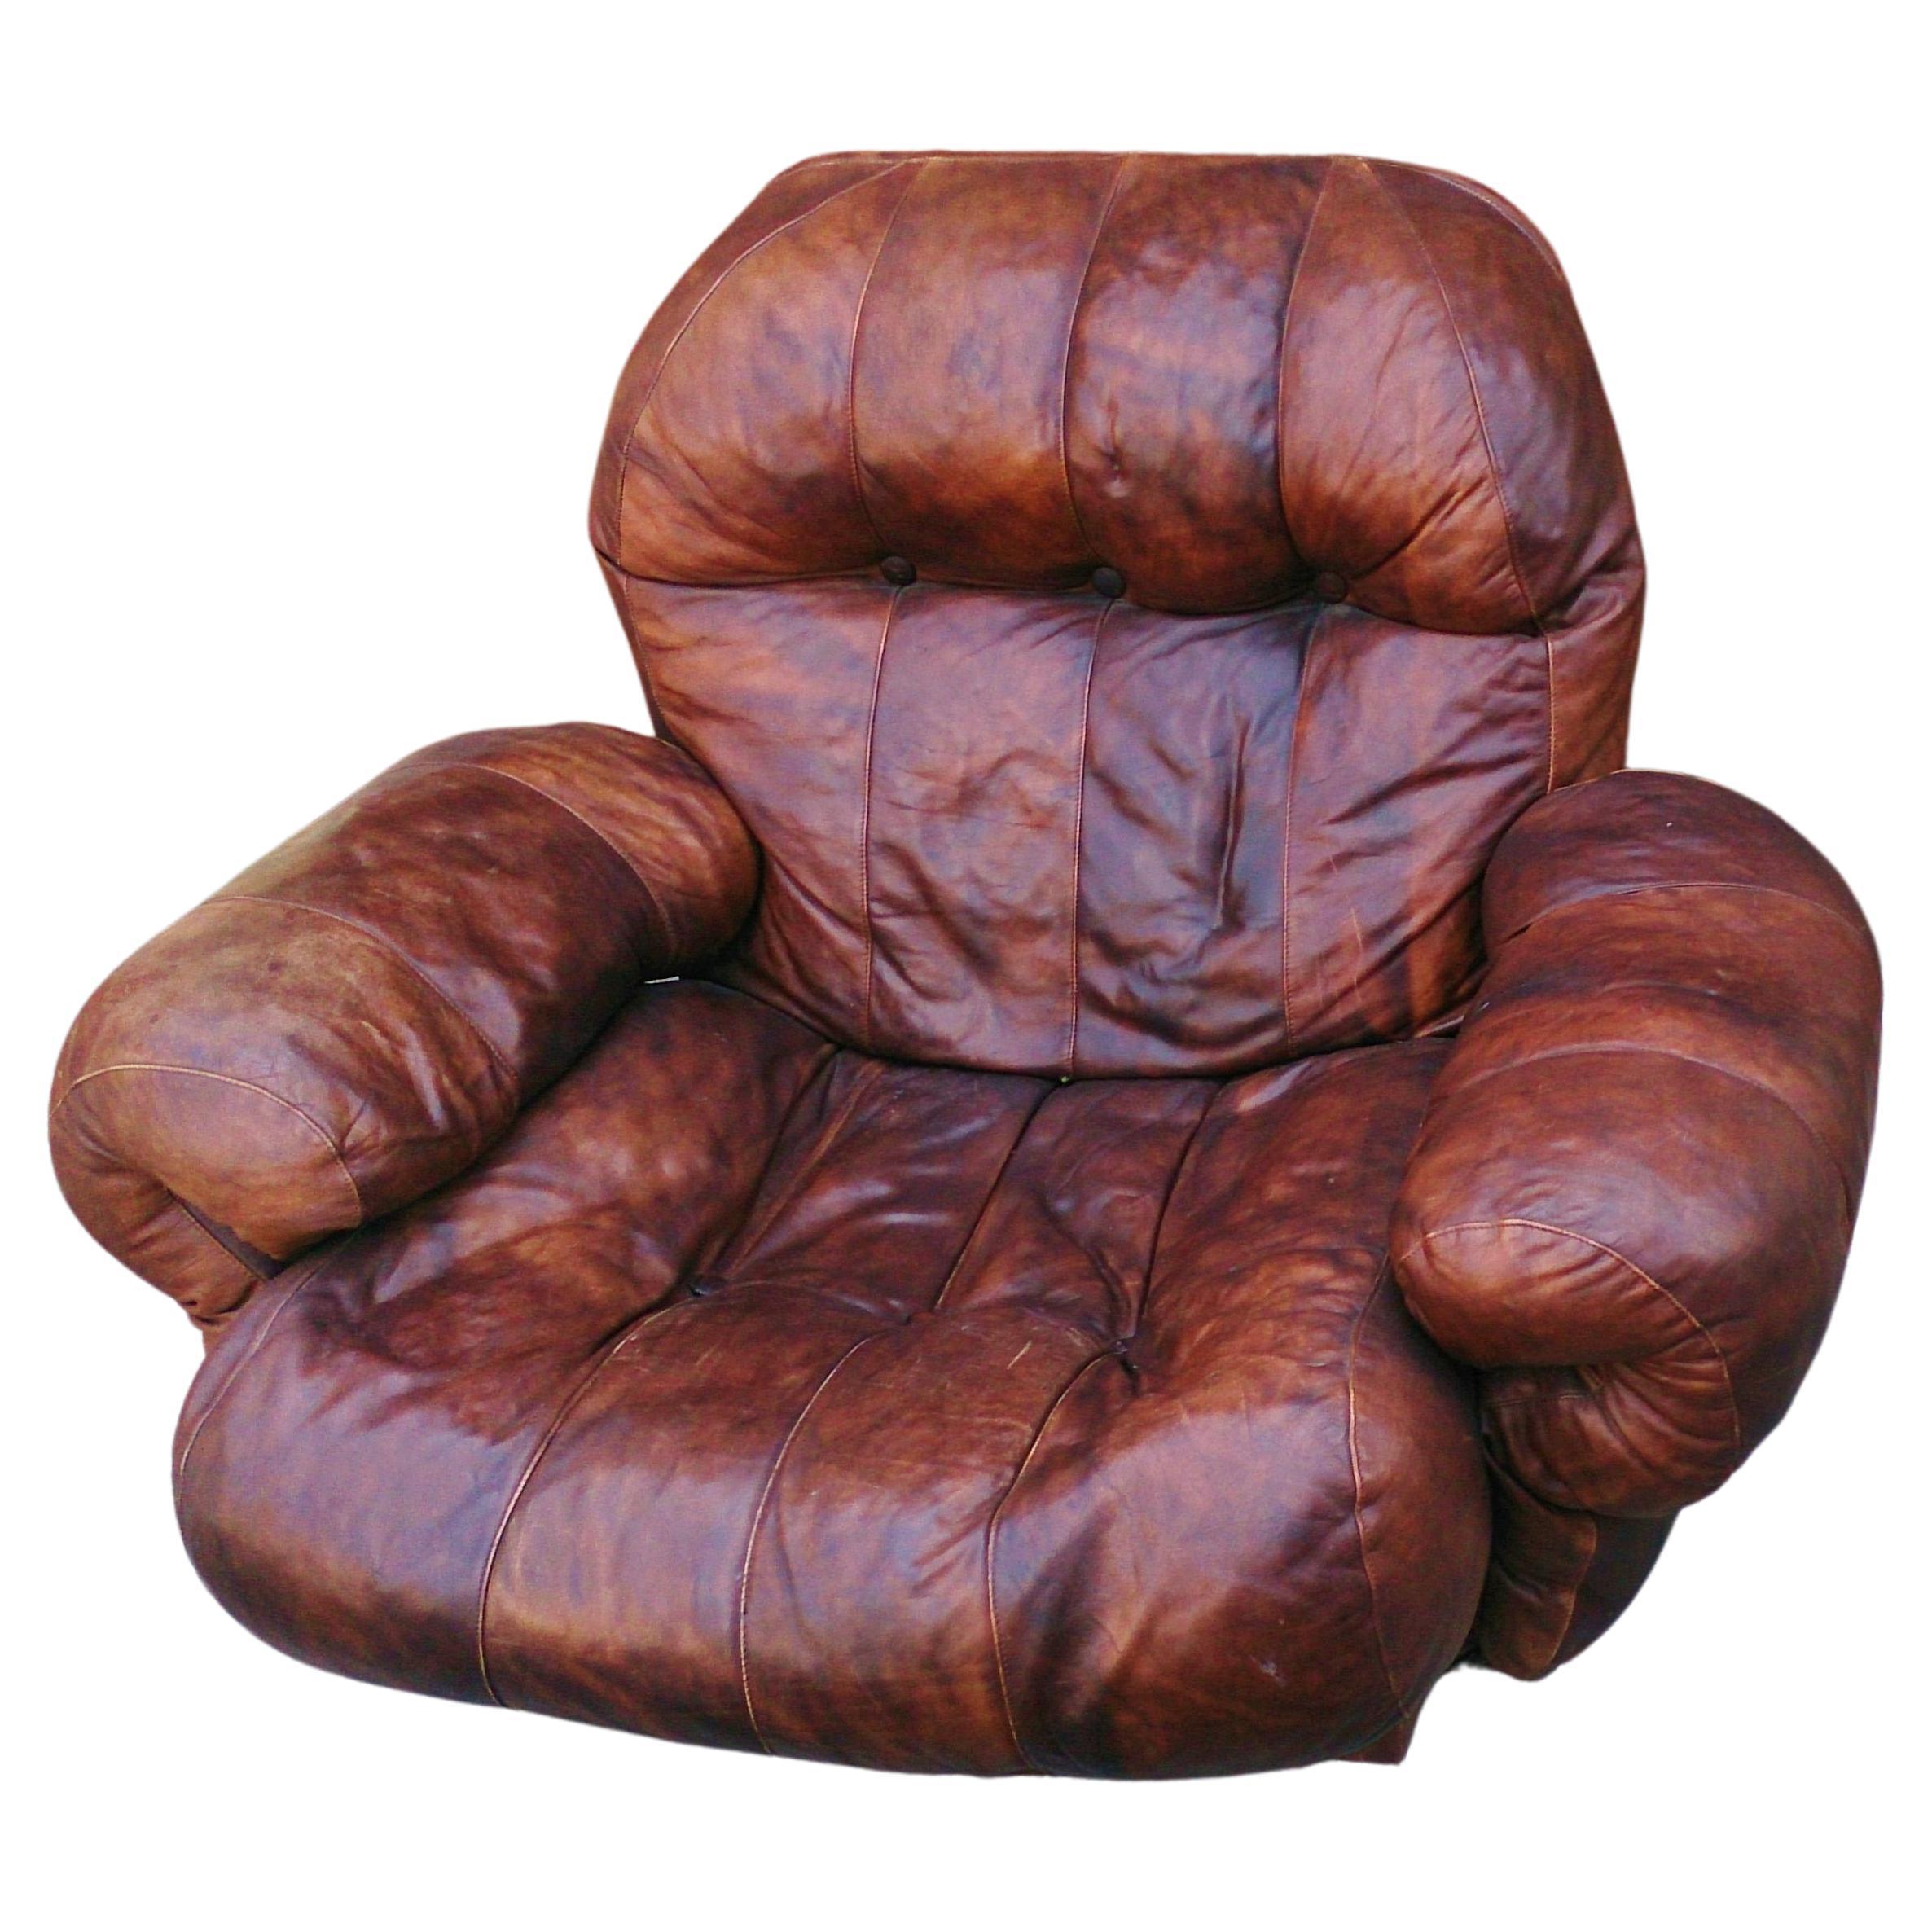 Vintage brown leather lounge chair from 1980s.
Abrasions on the back.
A very comfortable armchair, it can stand in the living room or bedroom.